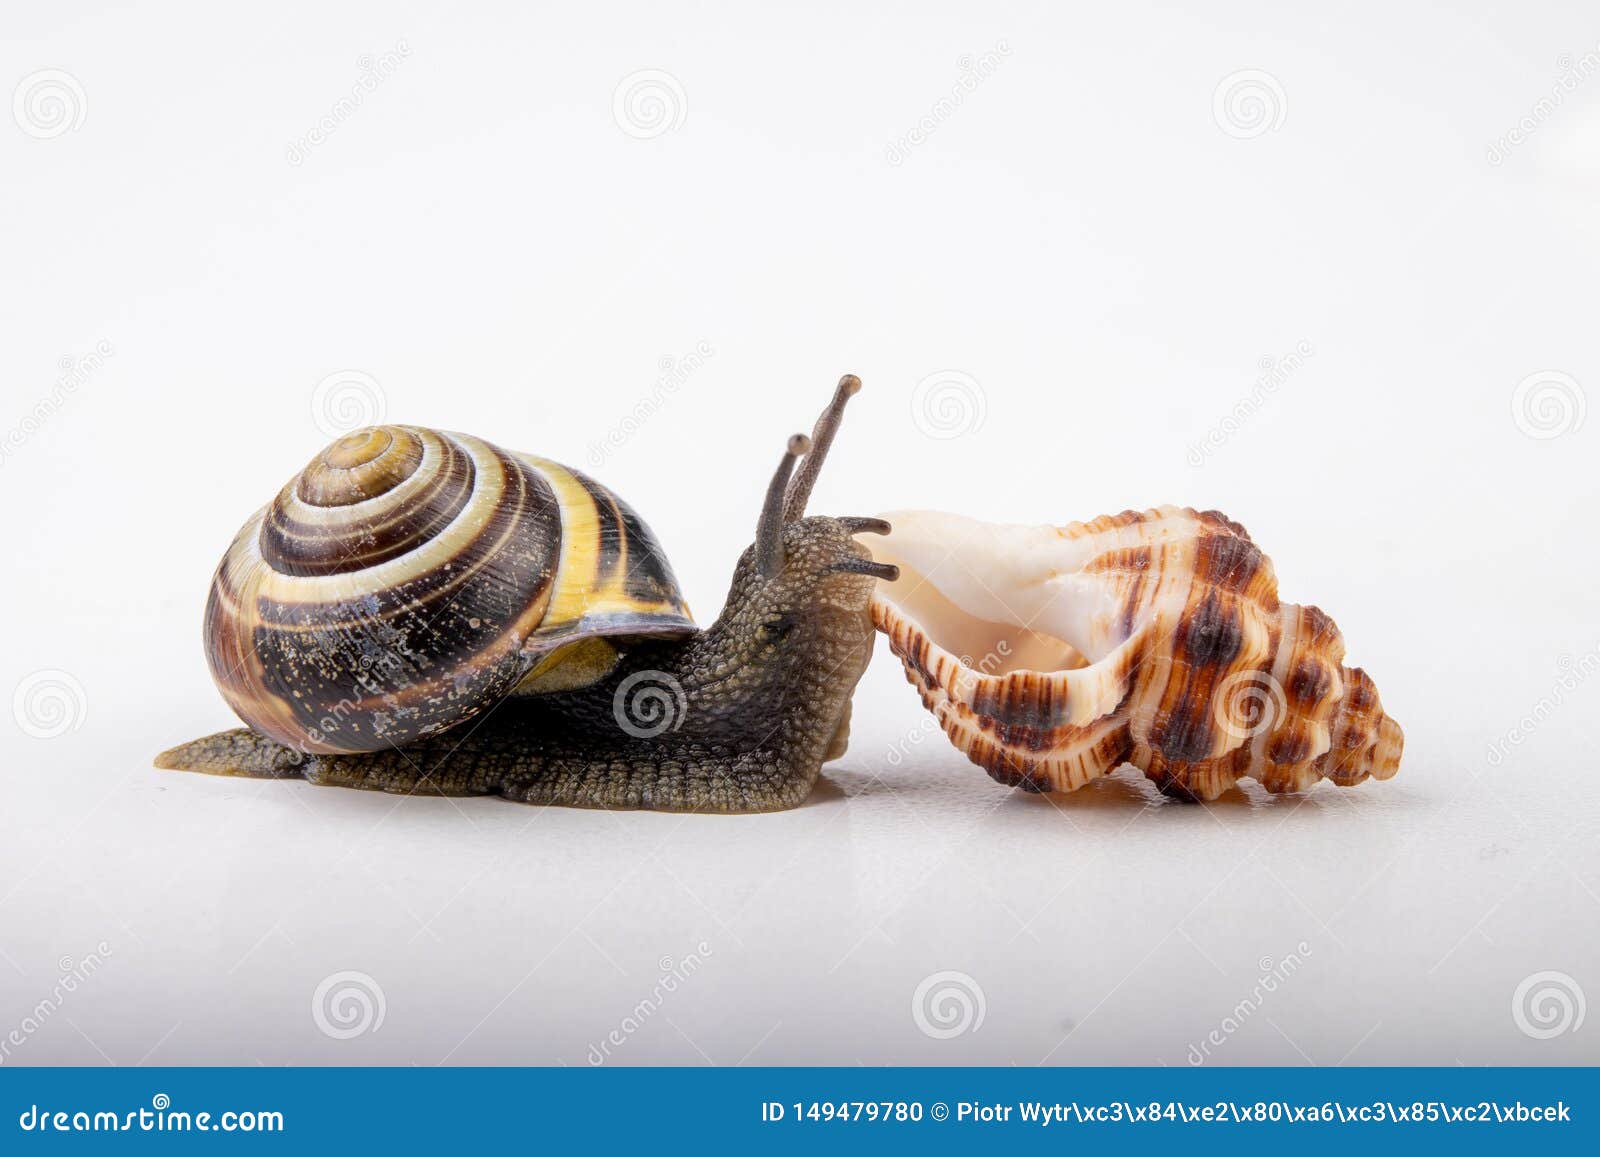 Live Snail And Empty Mushes Left On A Light Table Snail In Search